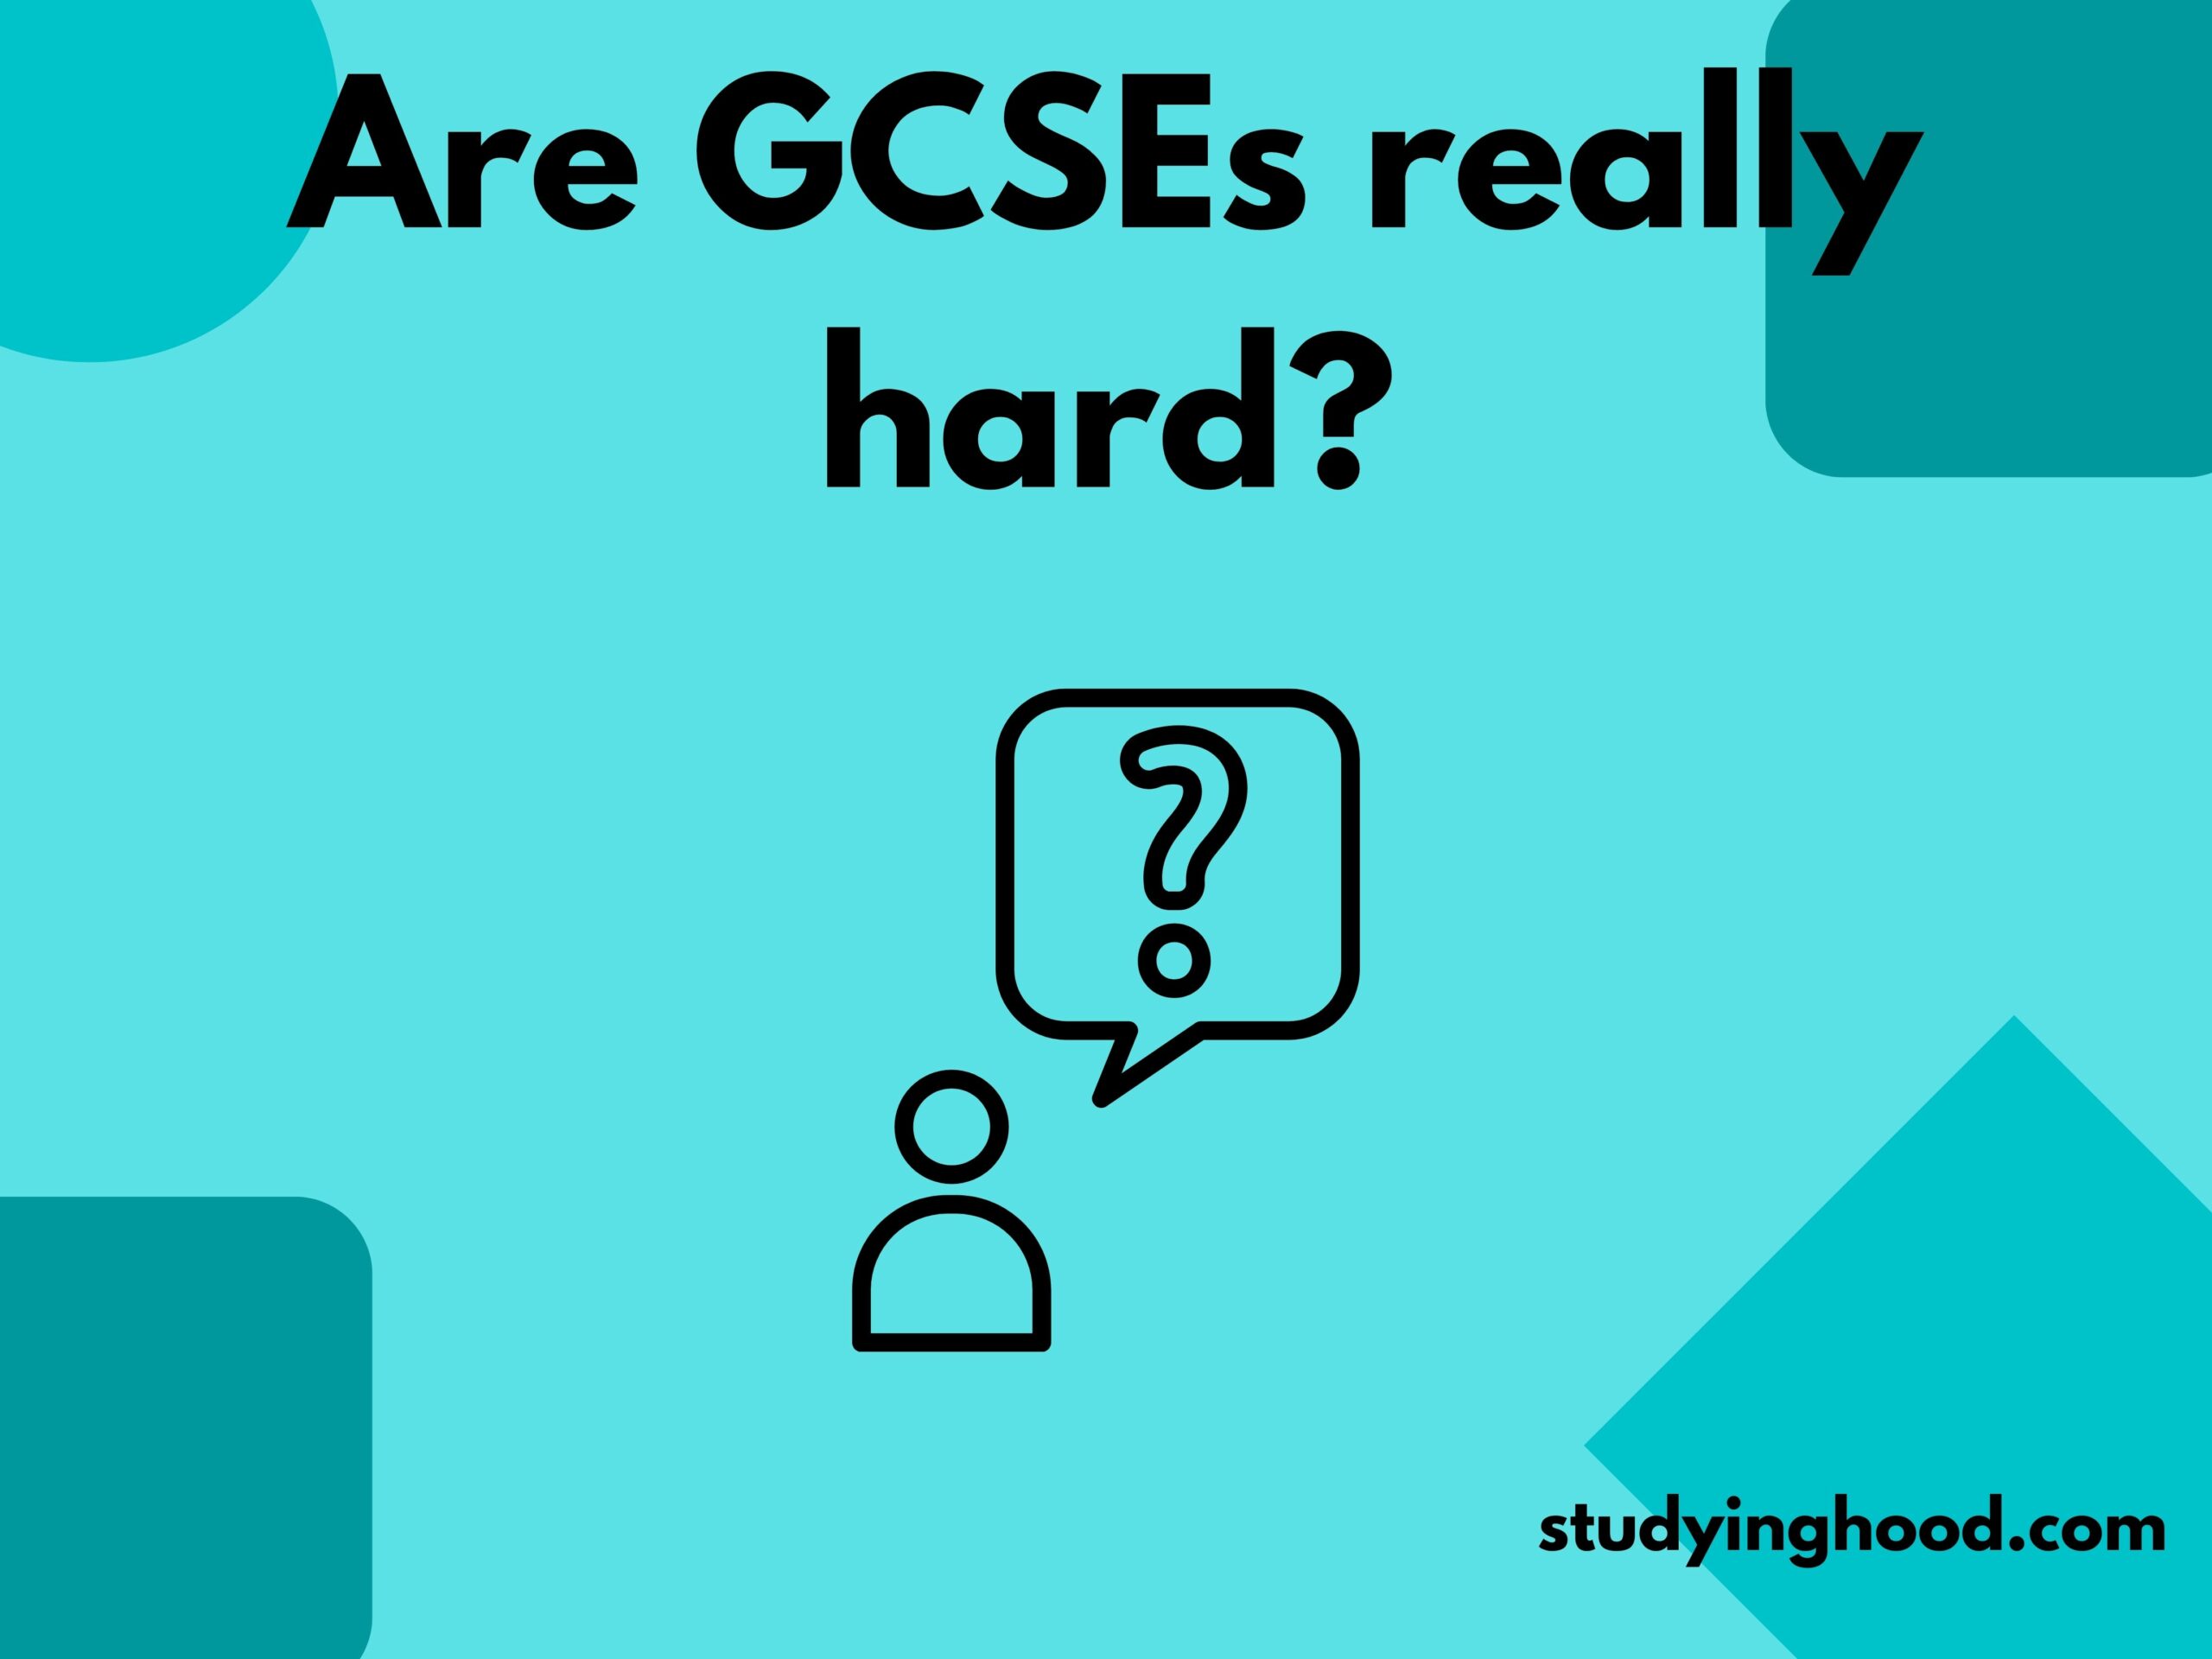 Are GCSEs really hard?